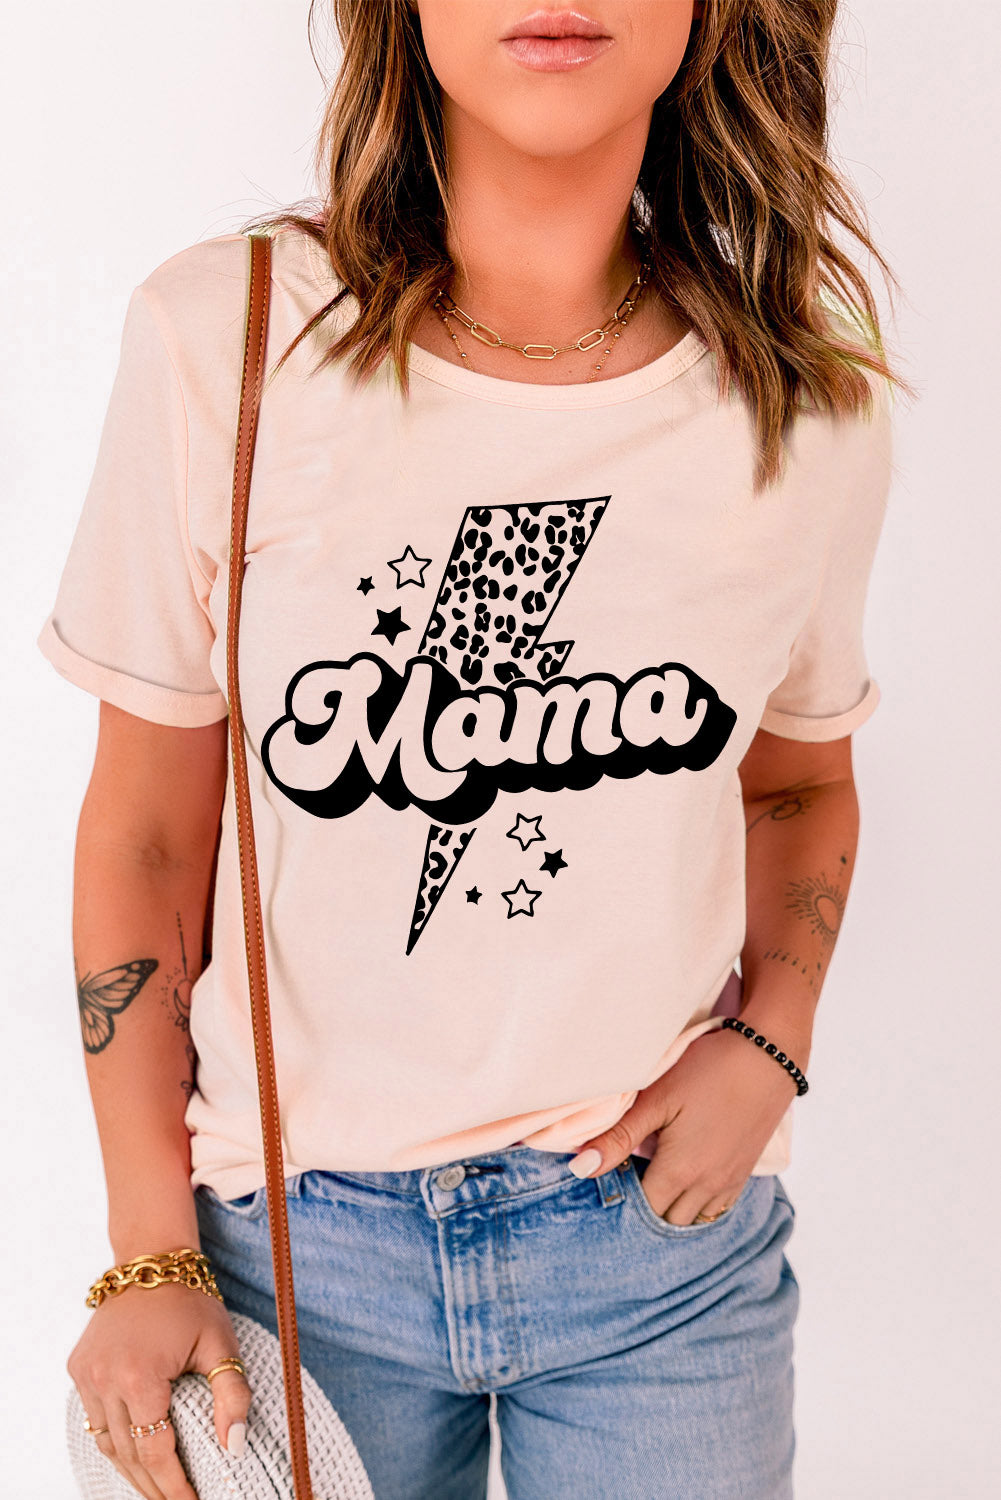 MAMA Lightning Graphic Round Neck Tee - ONLINE ONLY 2-10 DAY SHIPPING